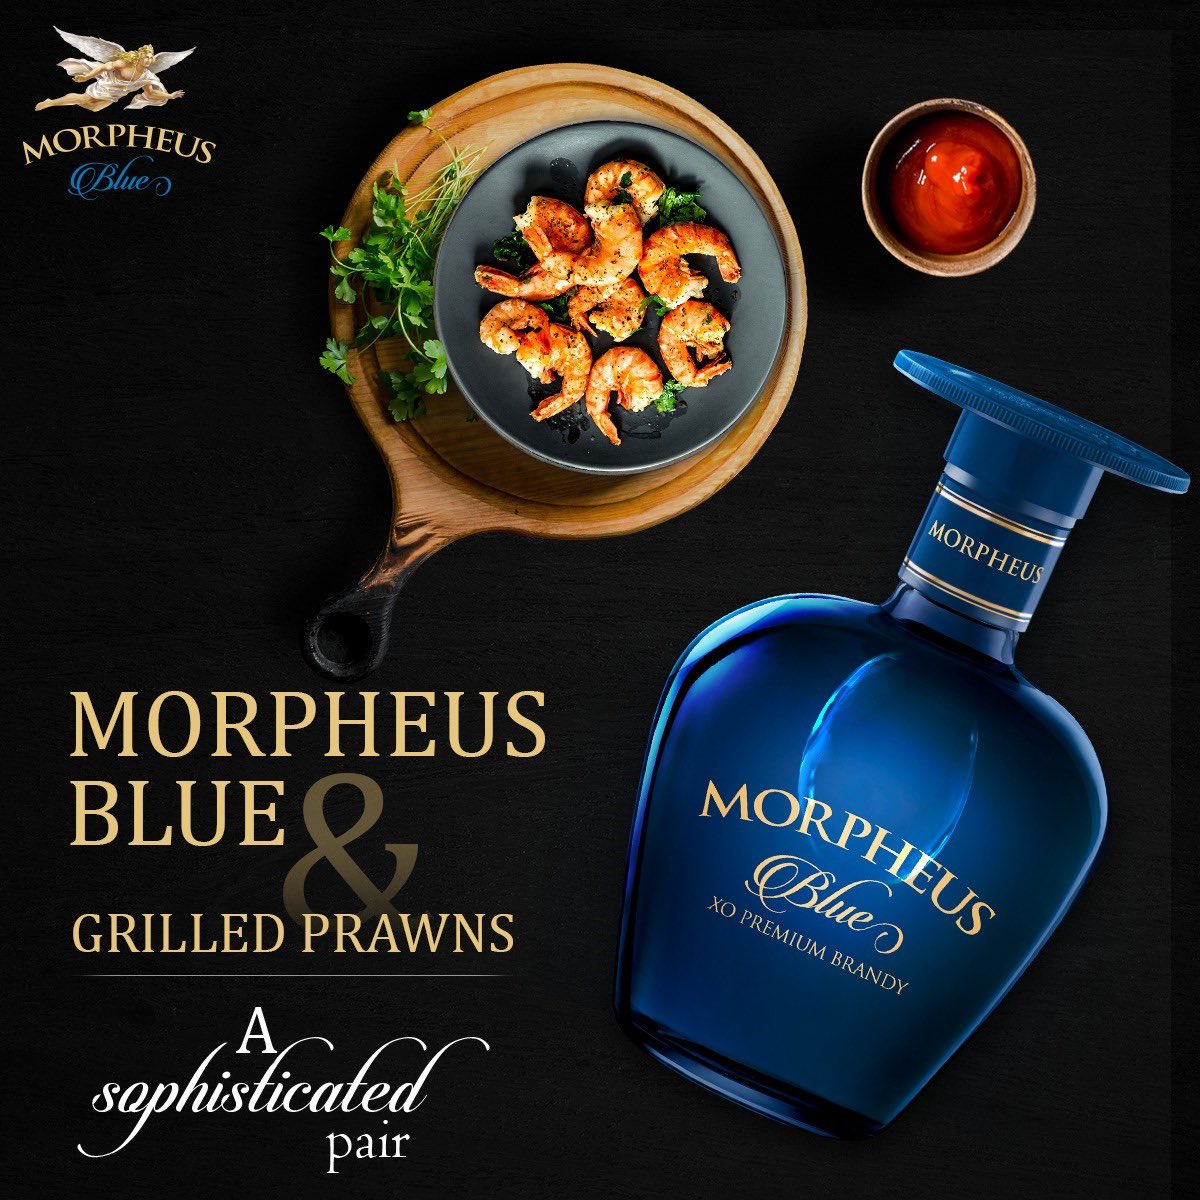 Savour tender grilled prawns with Morpheus Blue Brandy, where delicate flavours meet smooth notes for a delightful experience.

#MorpheusBrandy #MorpheusXOBrandy #Brandy #MorpheusDareToDream #DareToDream #LargestSellingBrandy